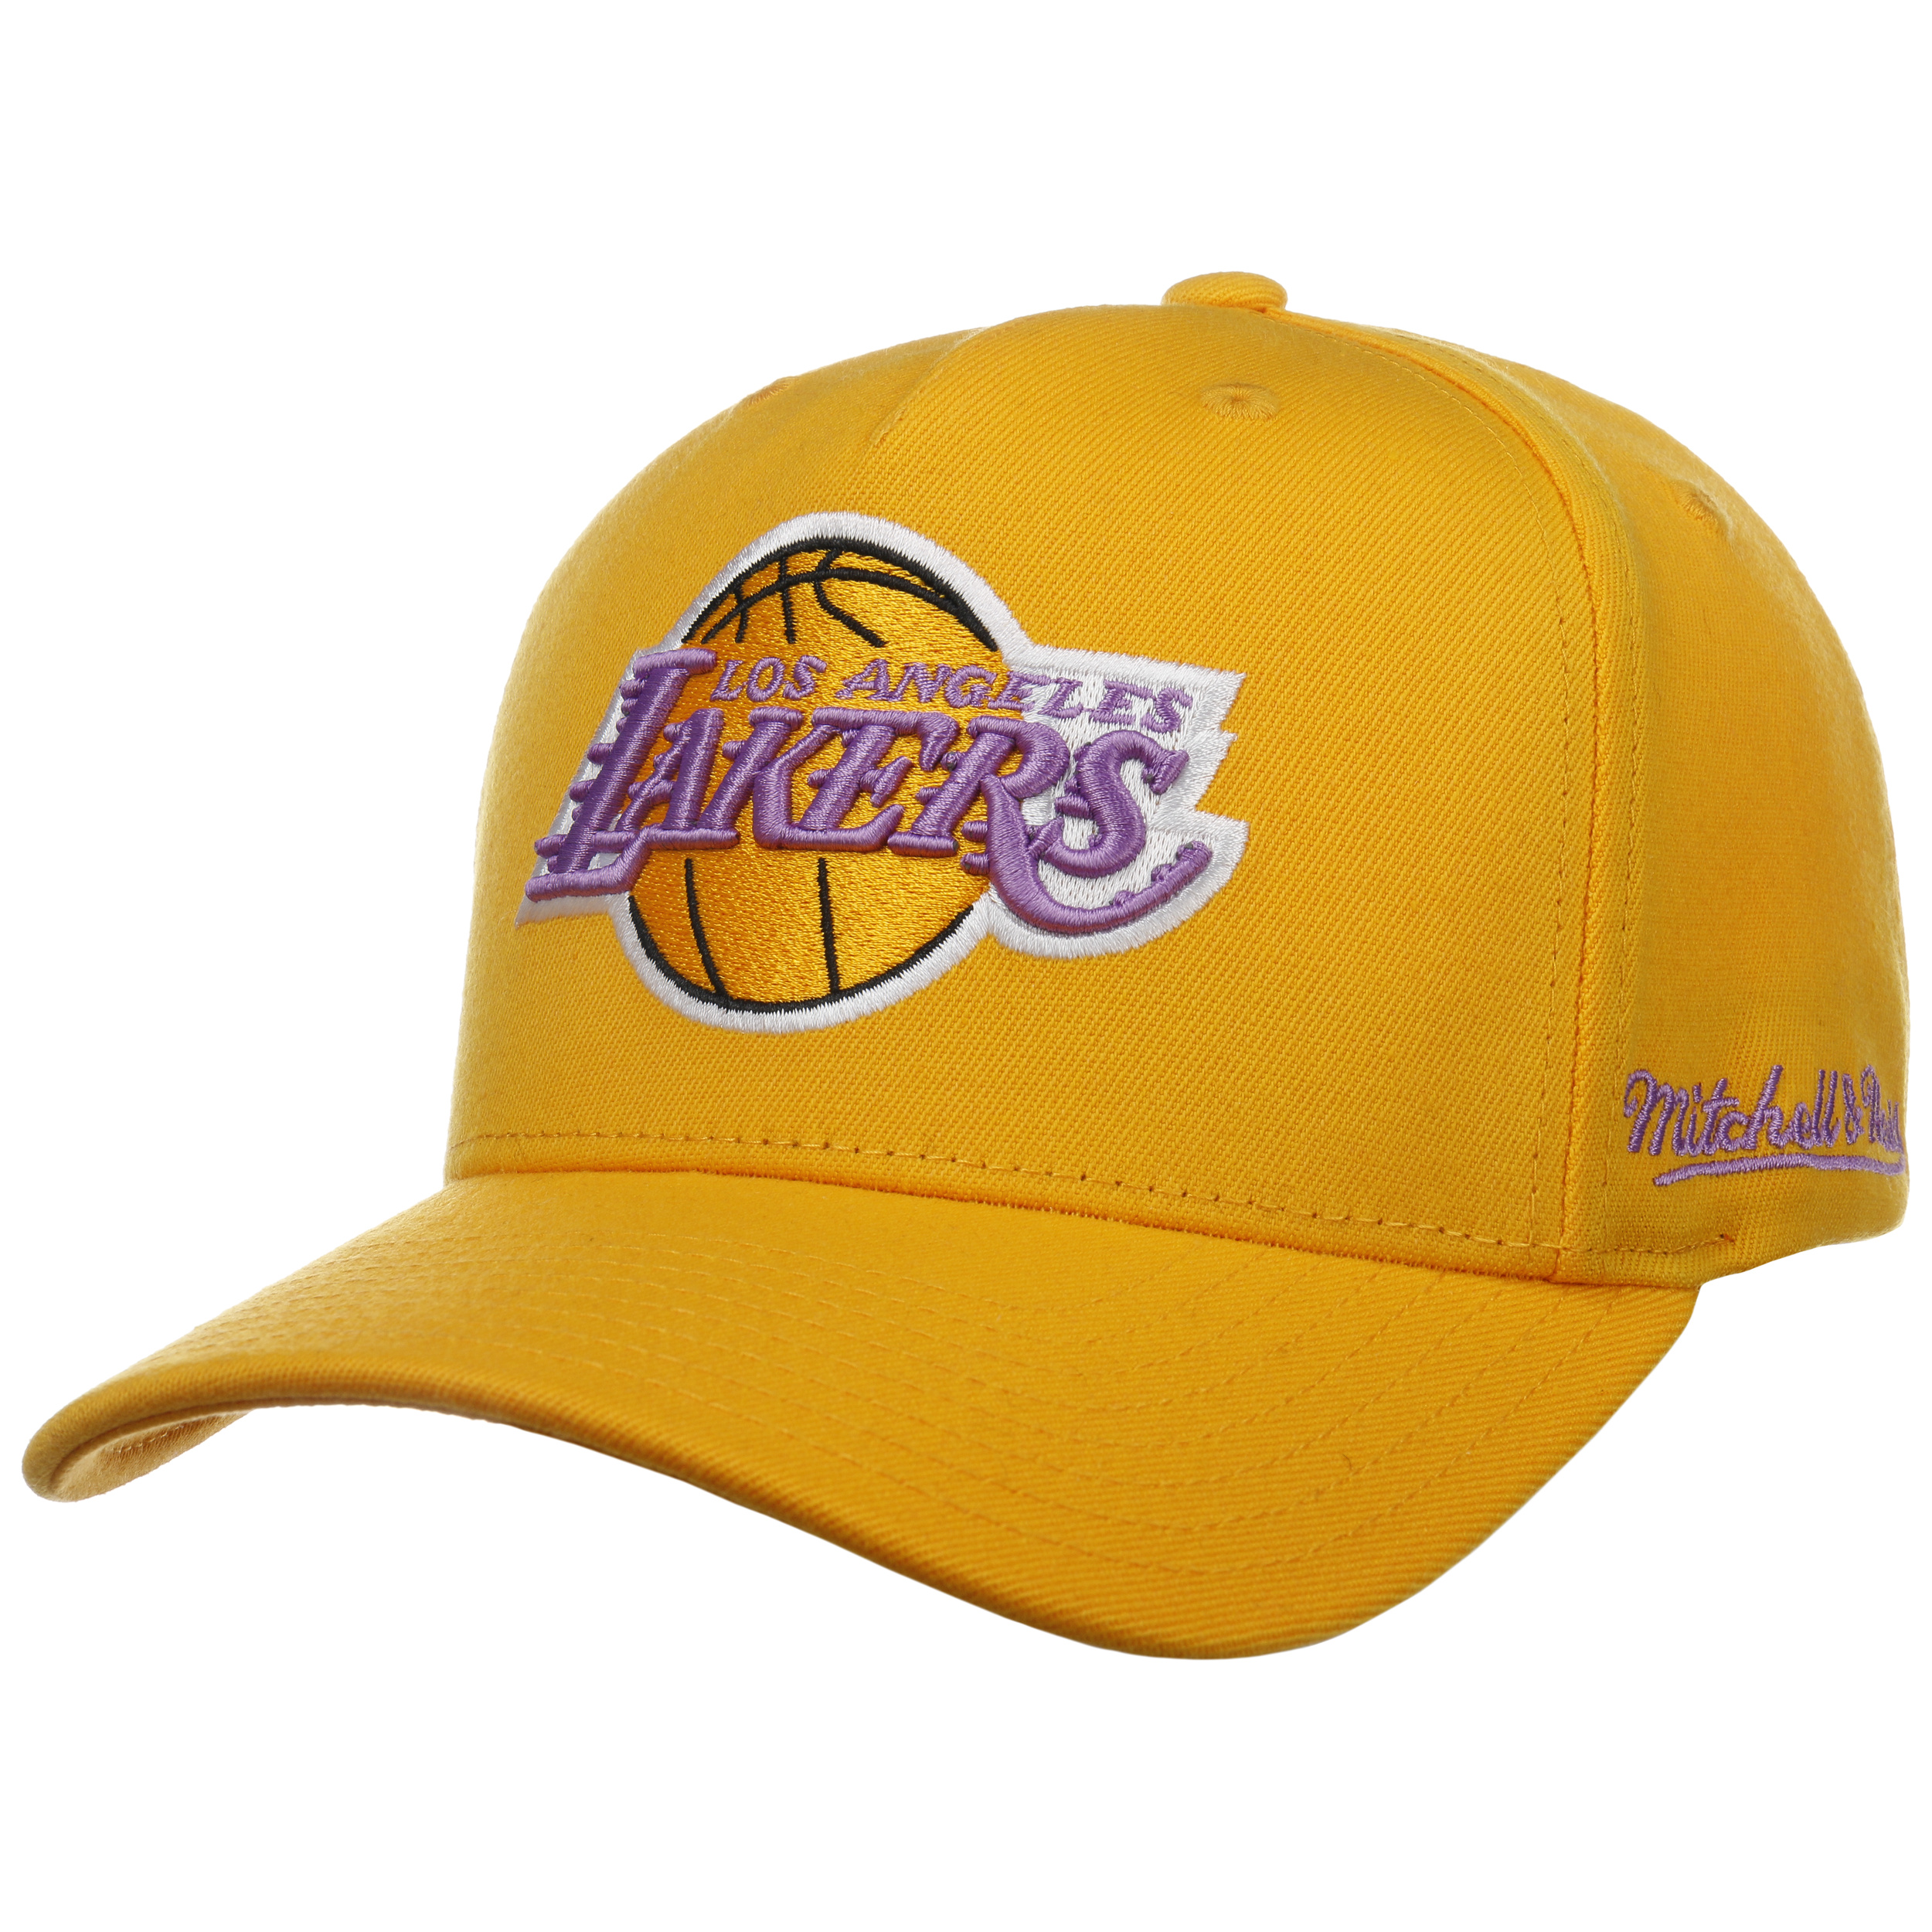 Lids Los Angeles Lakers Mitchell & Ness Upside Down Snapback Hat -  Purple/Gold